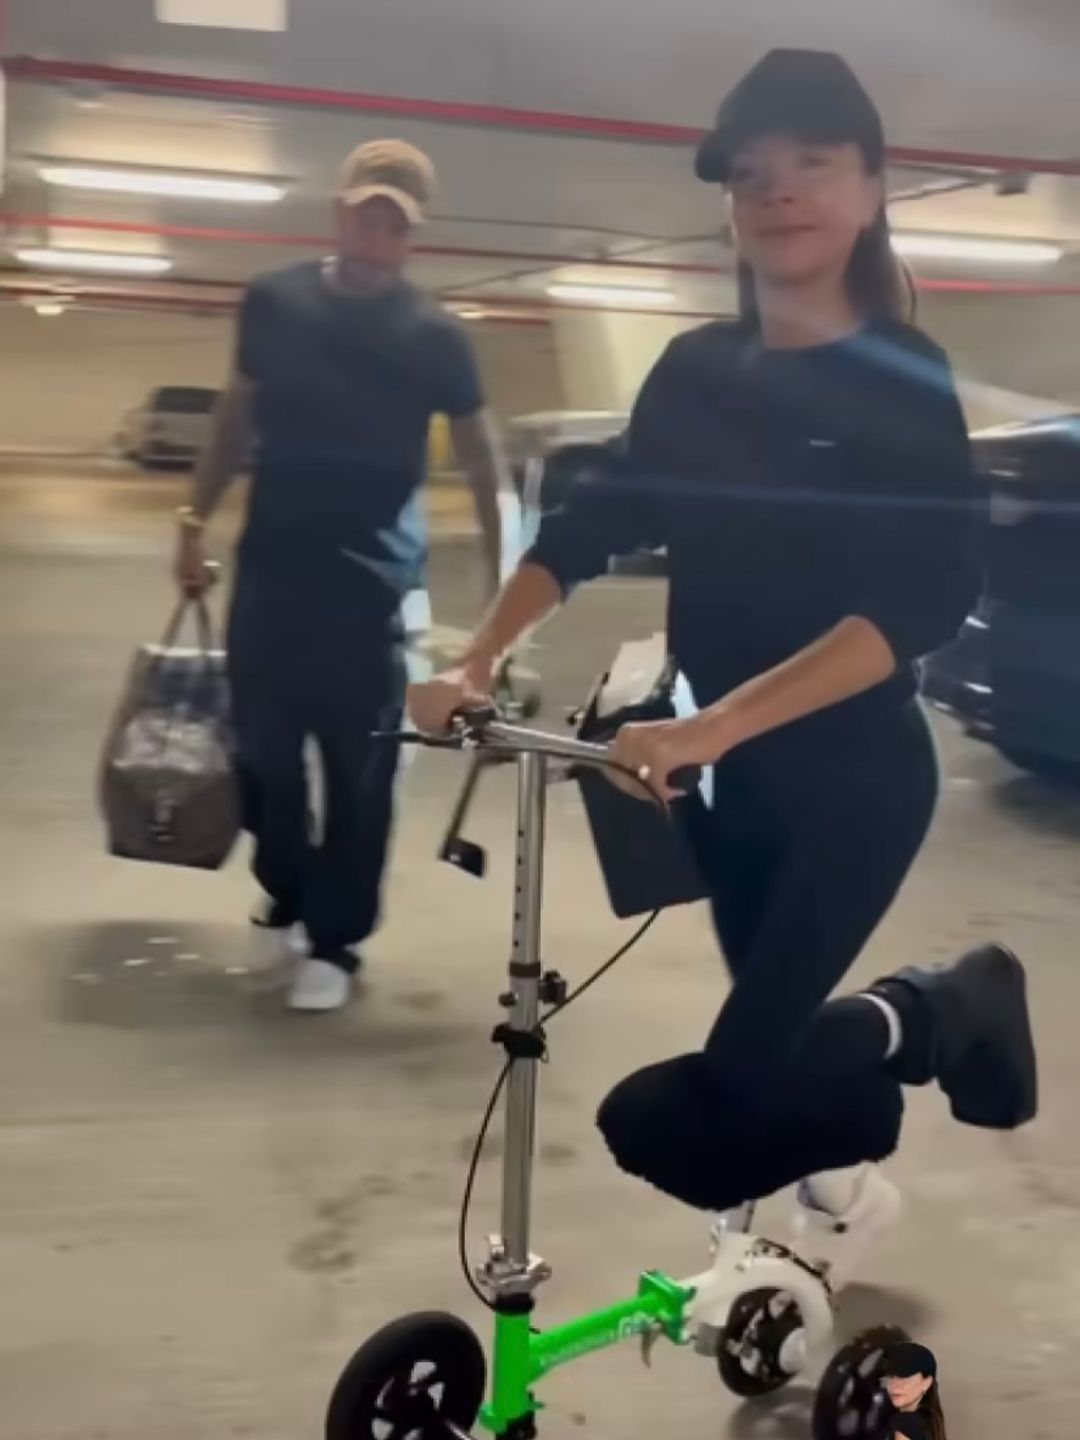 Victoria scooted around with a luxe box bag on her shoulder 